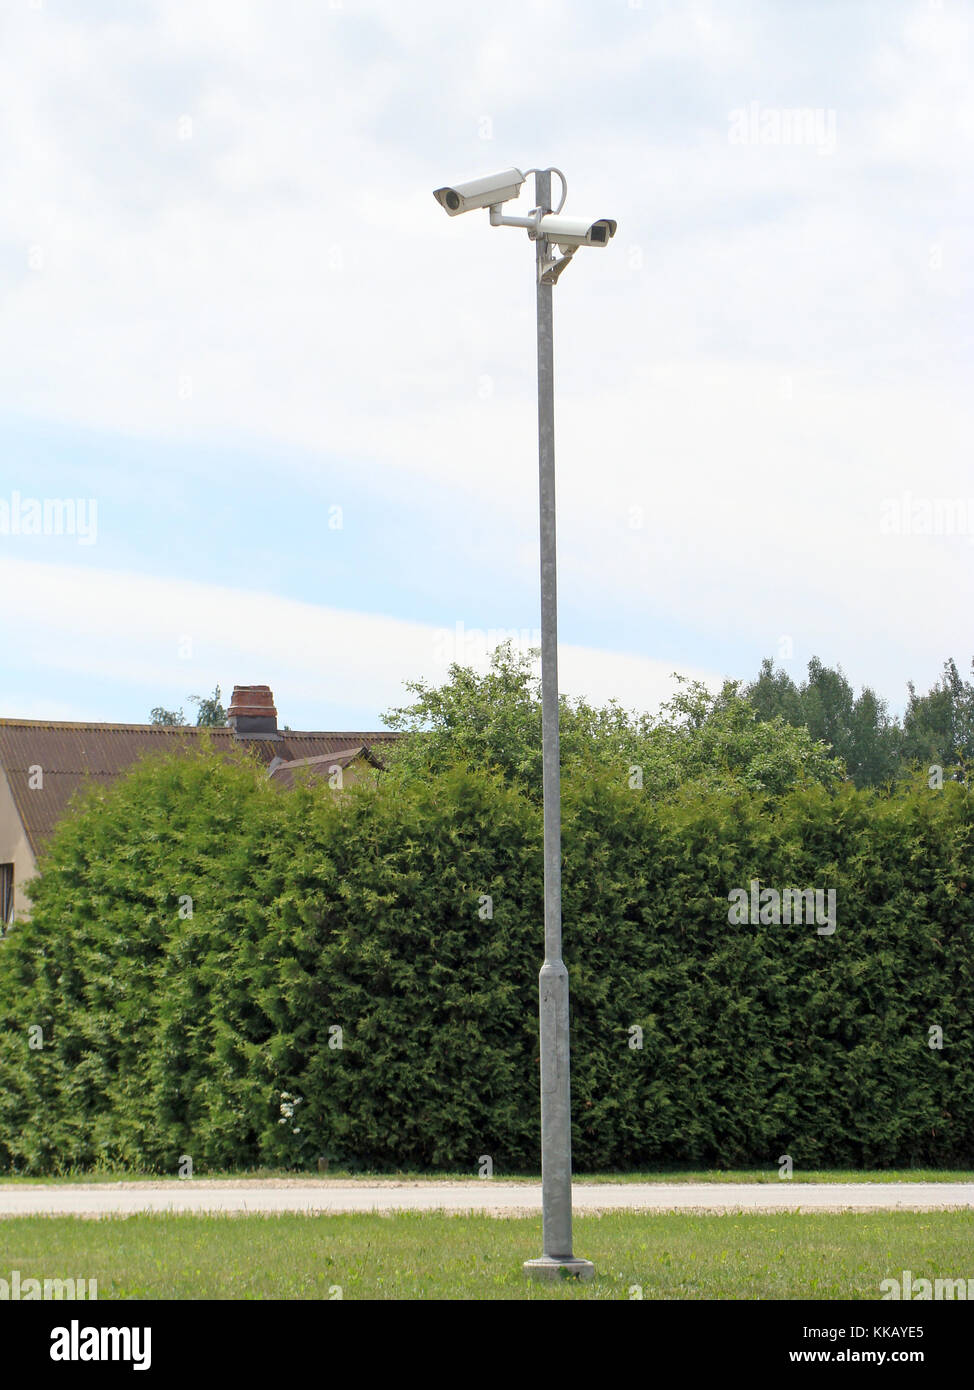 Two security monitoring, video cameras on high metal pole outdoor Stock Photo